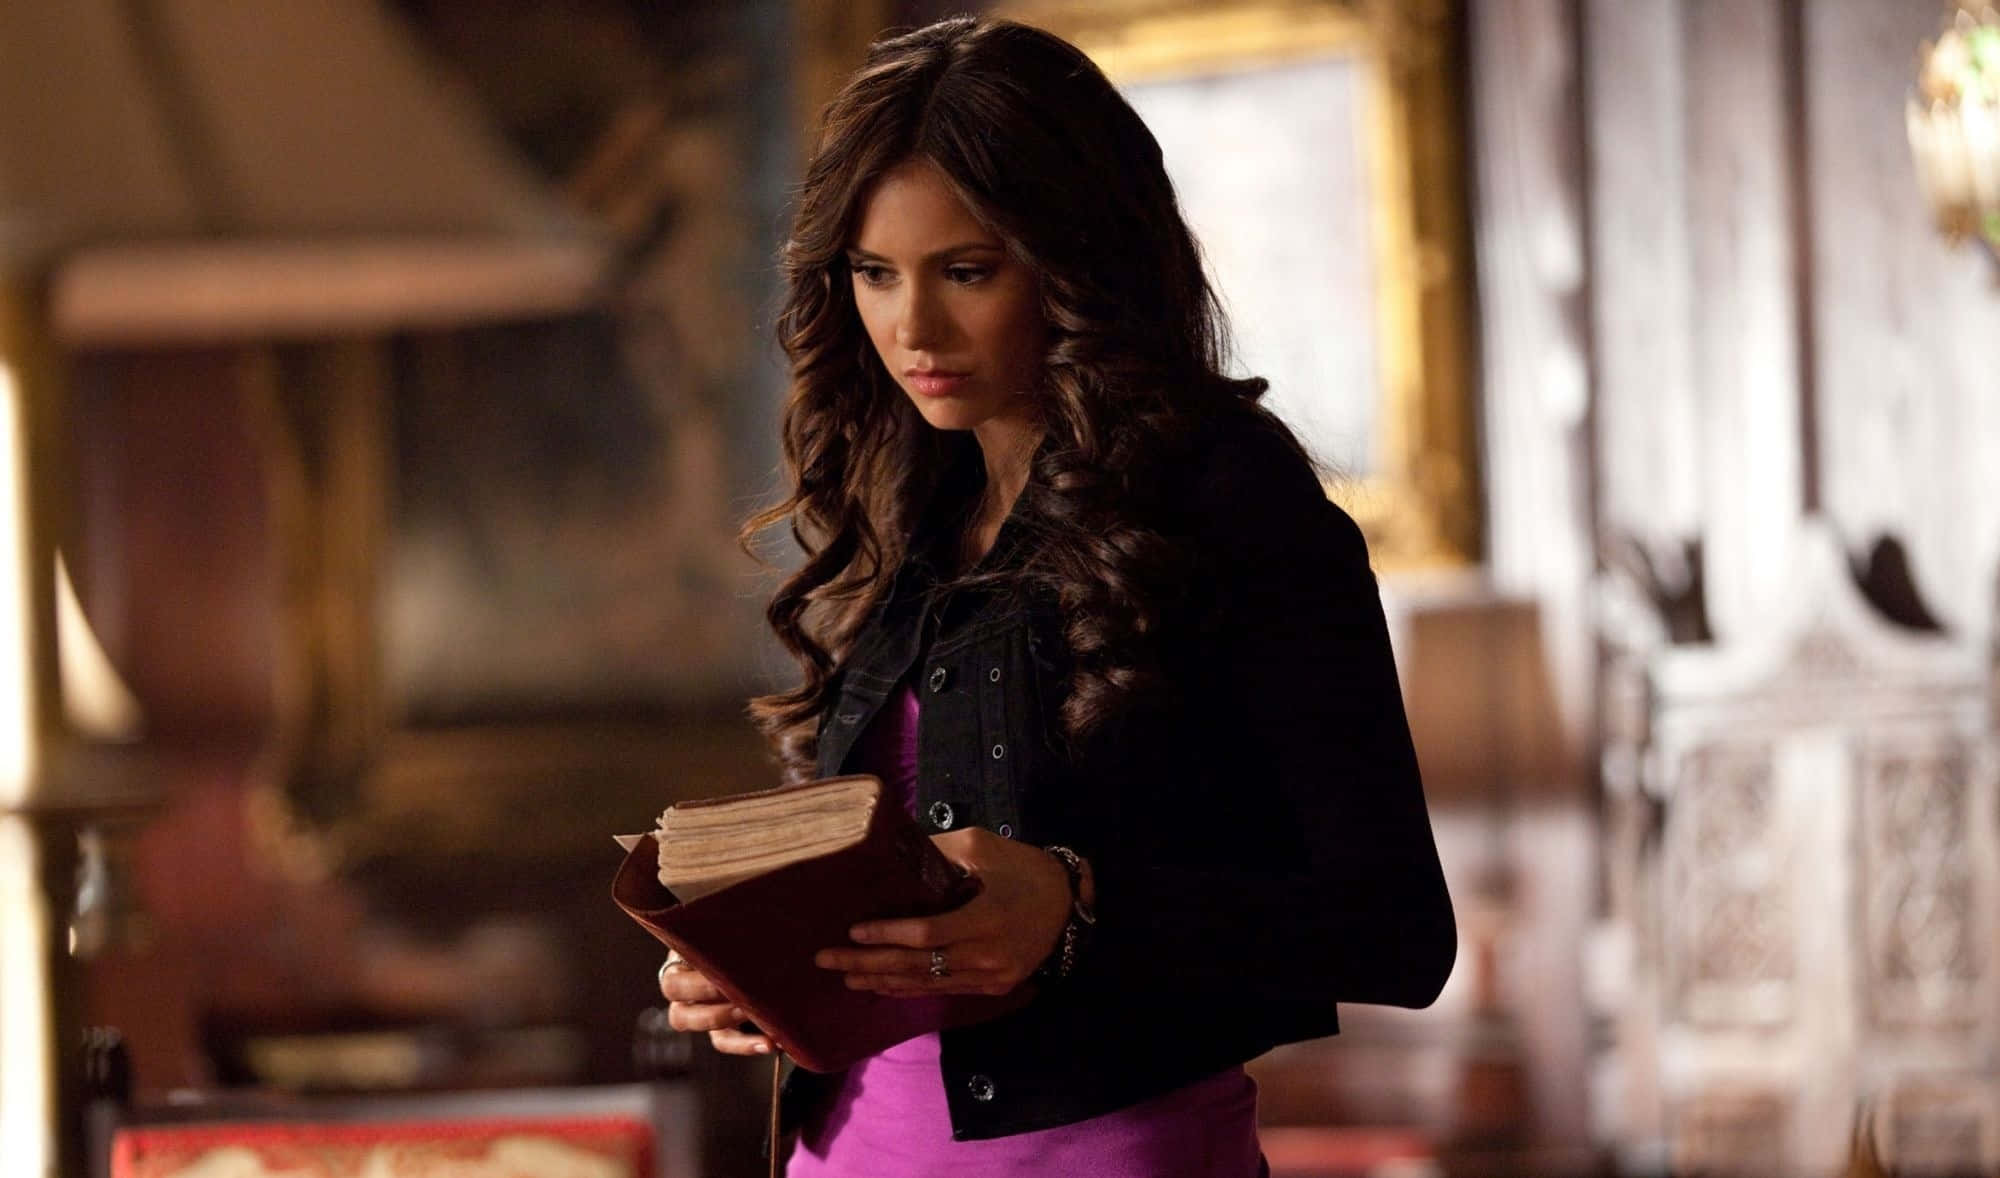 "enigmatic Katherine Pierce In A Haunting Stare" Wallpaper